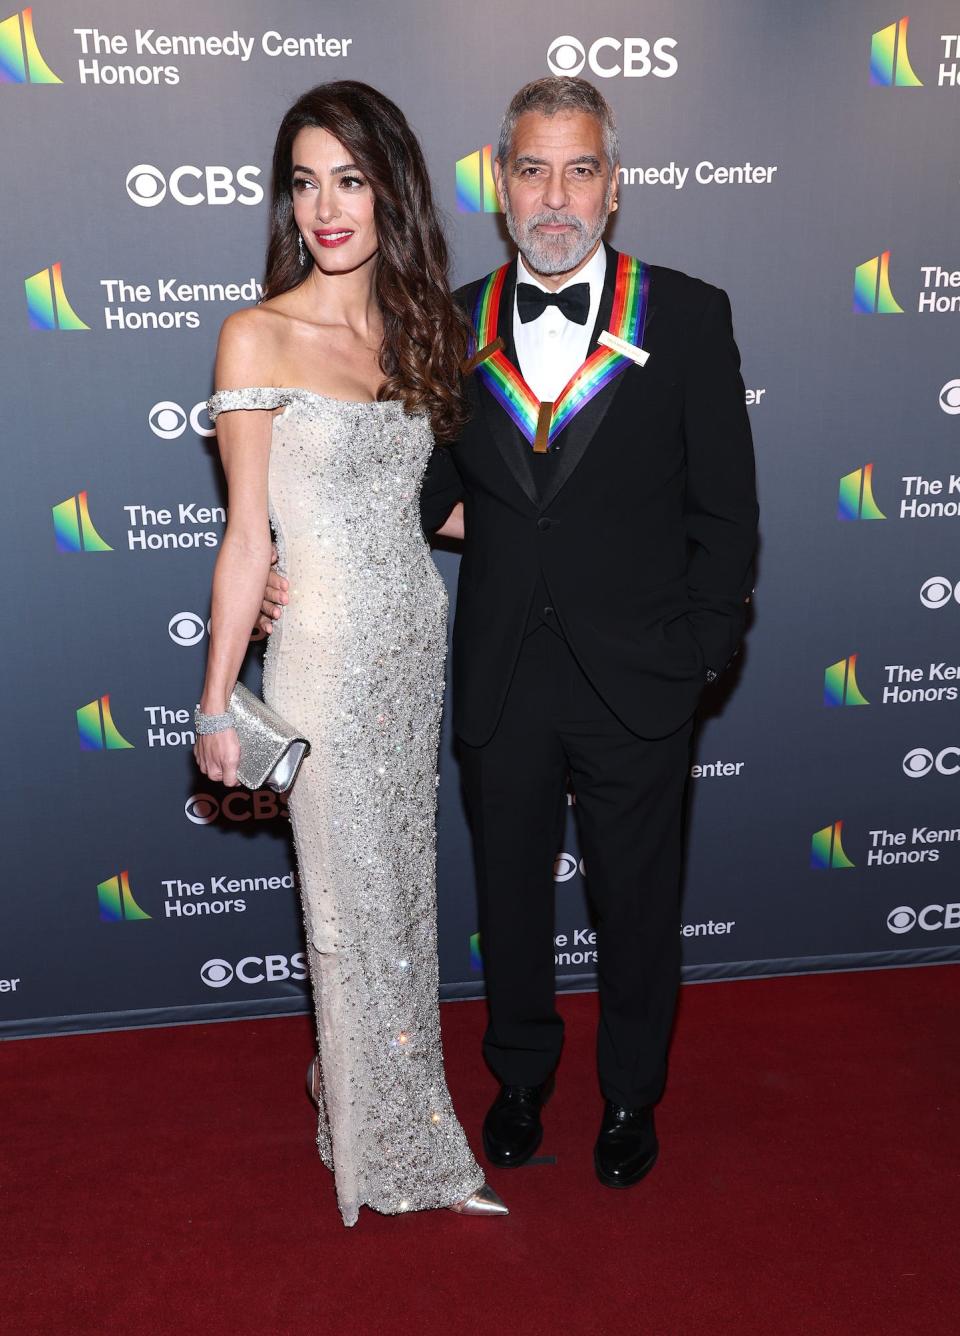 Amal and George Clooney at the Kennedy Center Honors on December 4, 2022.